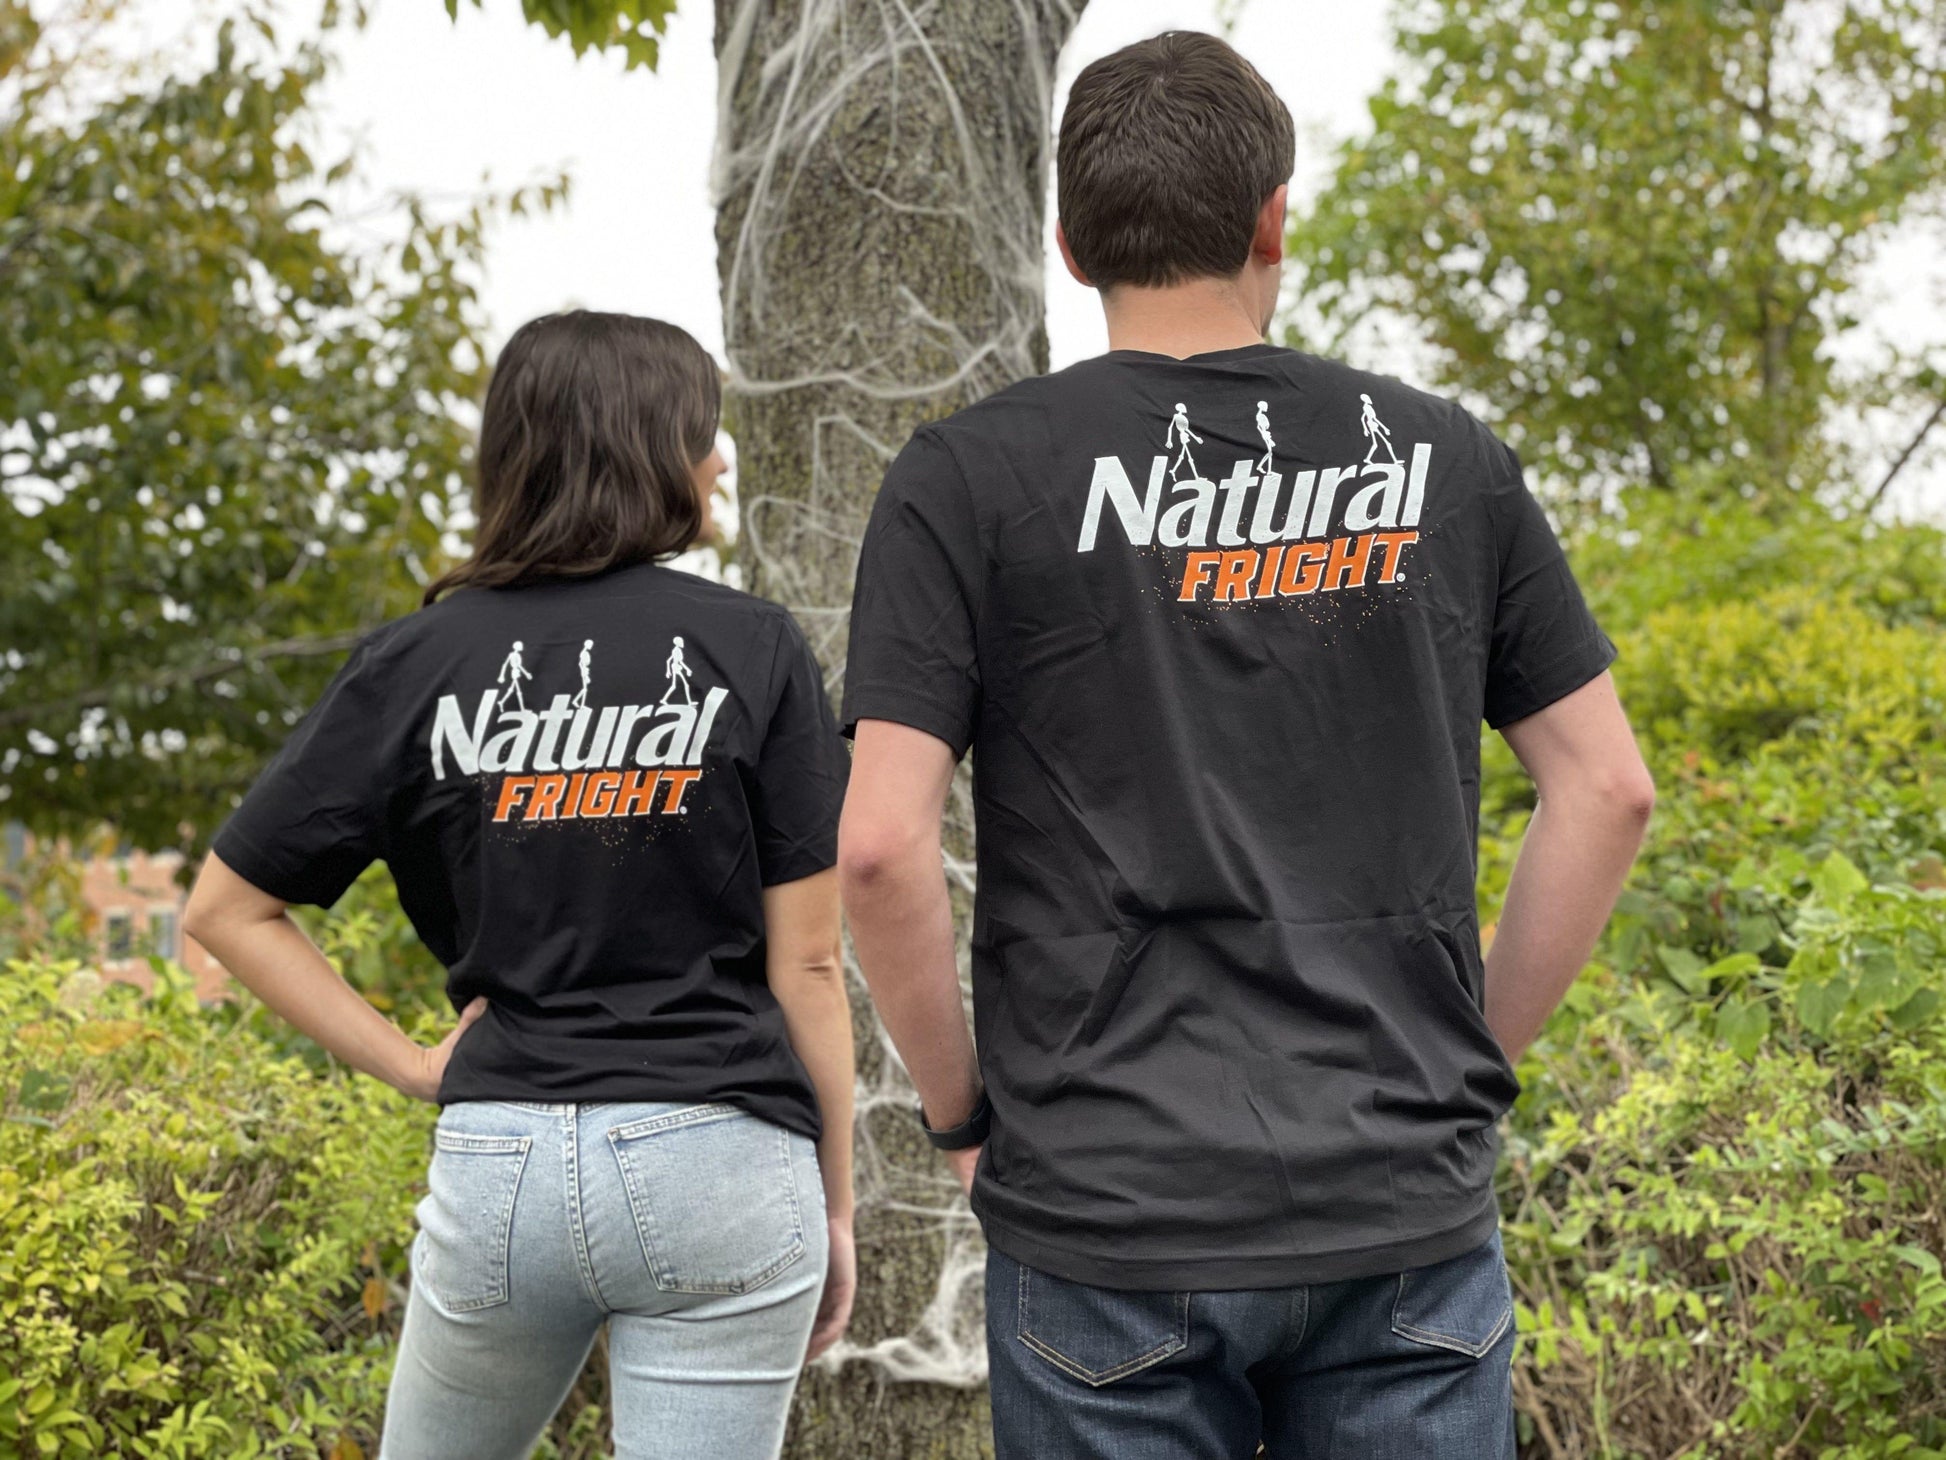 woman and man wearing black natural light backprint t shirt with natural light logo in white and orange on the back of shirt with white skeletons walking across logo